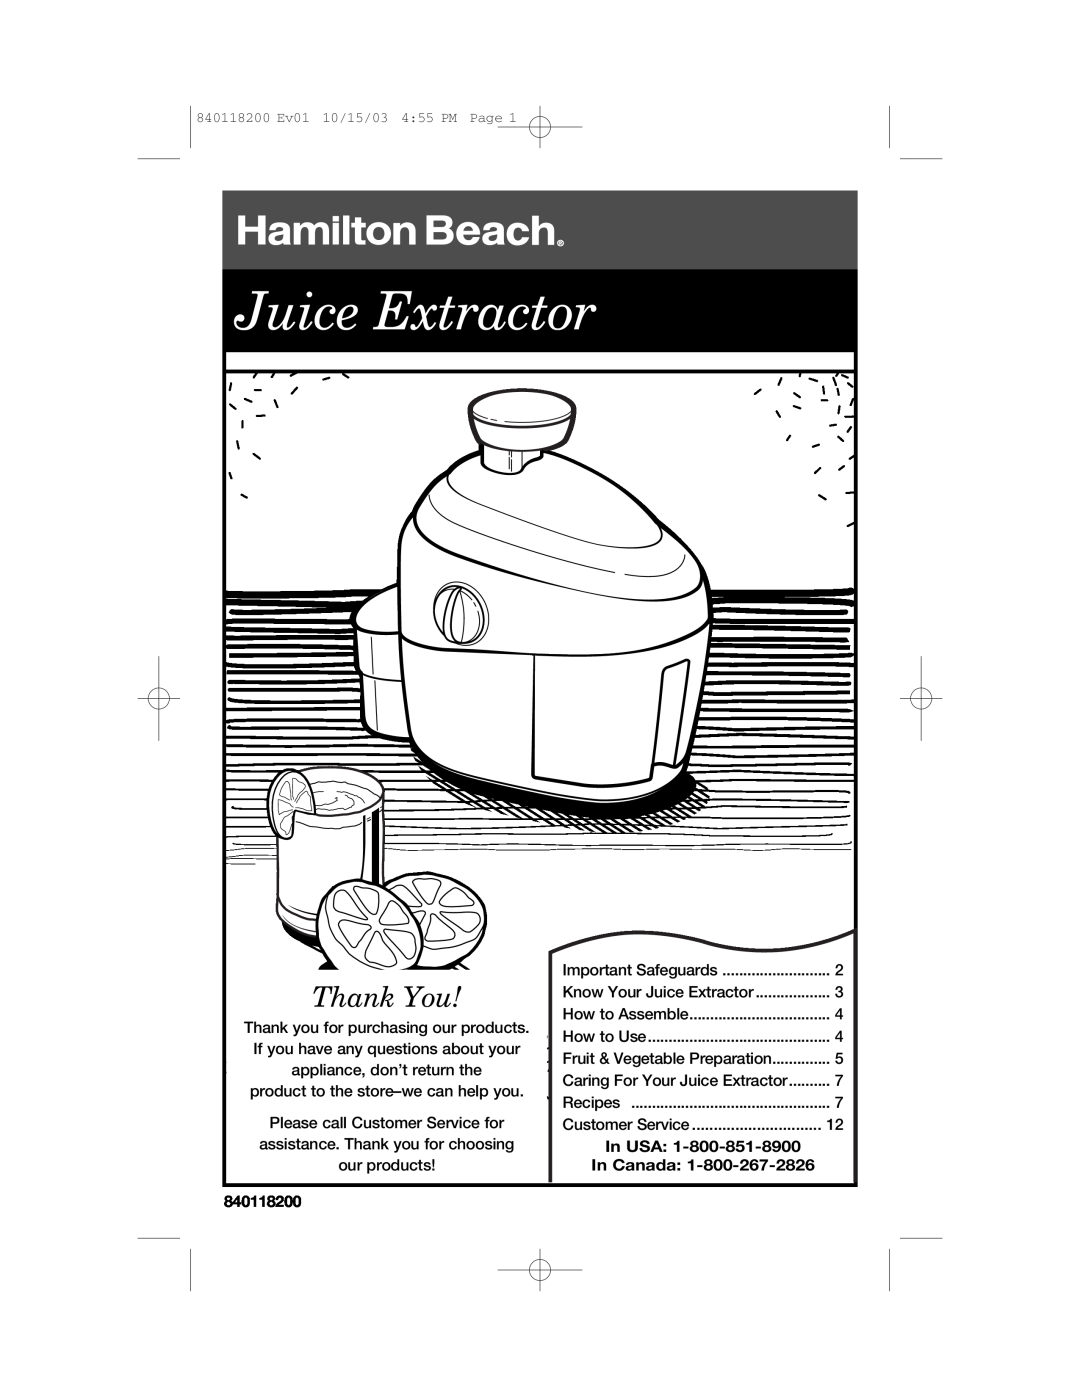 Hamilton Beach 67900 manual Juice Extractor, Thank You, In USA In Canada, 840118200 